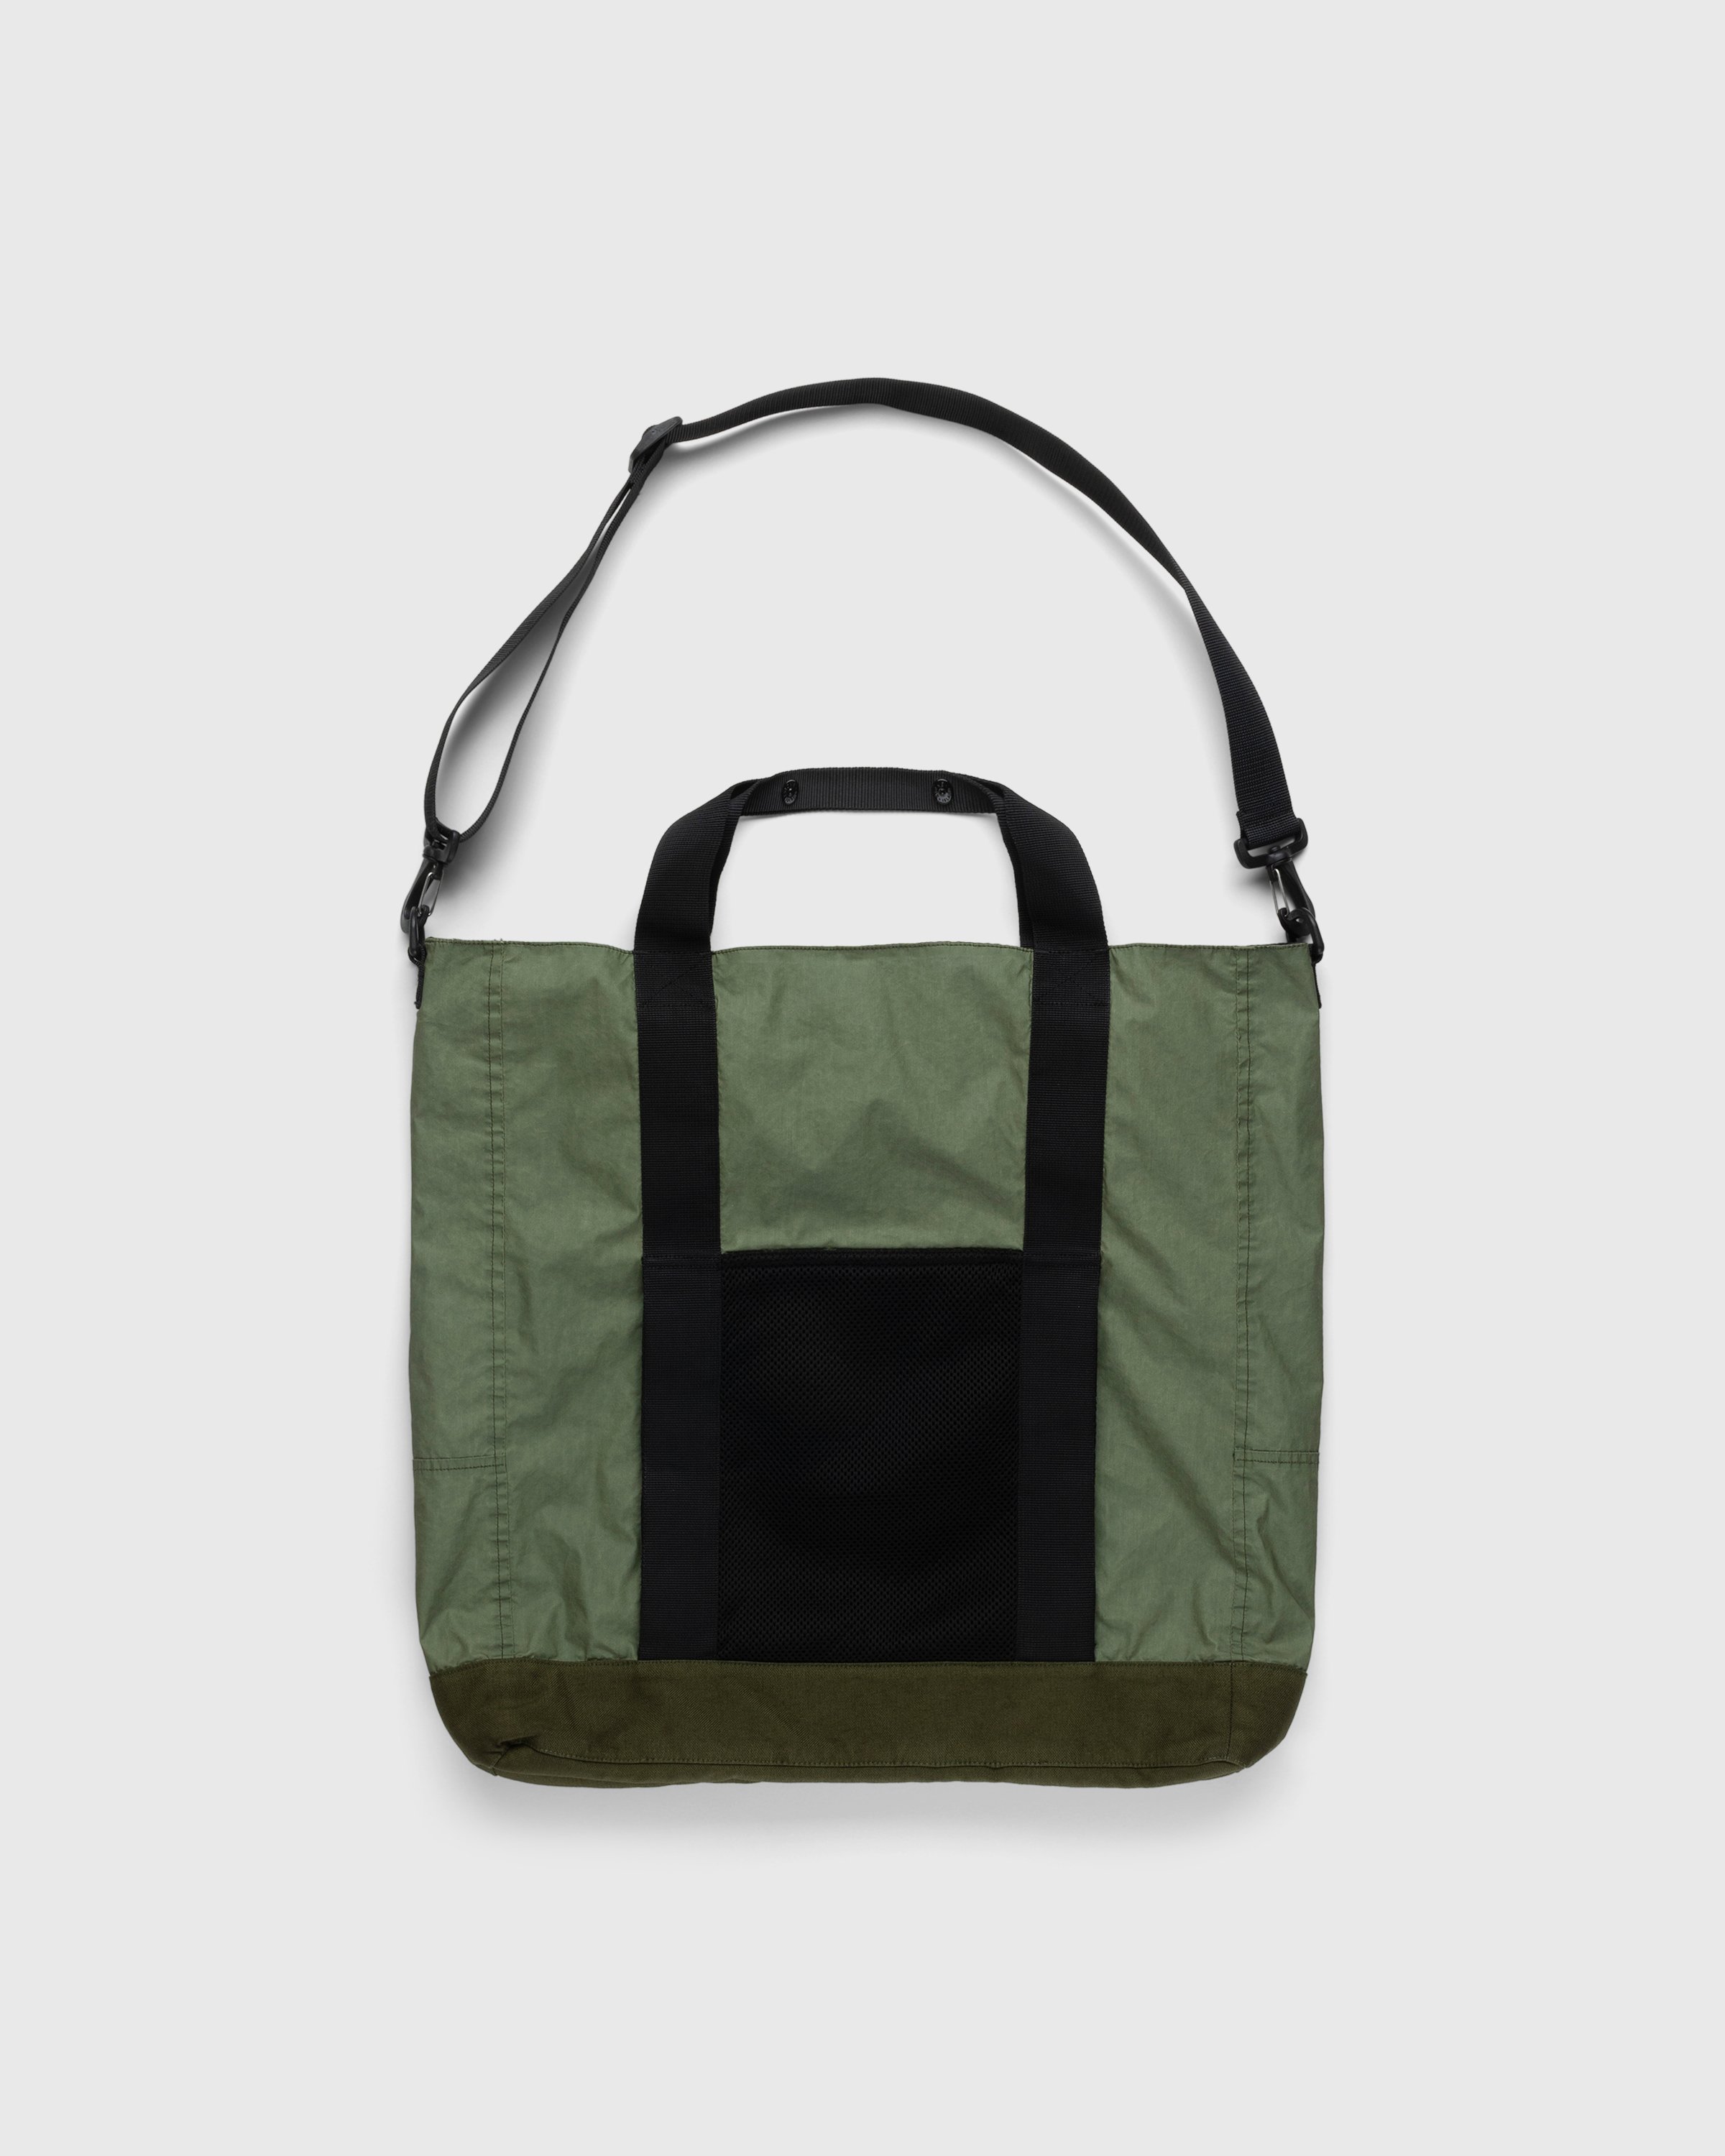 Stone Island - 91475 Garment-Dyed Tote Bag Olive - Accessories - Green - Image 2